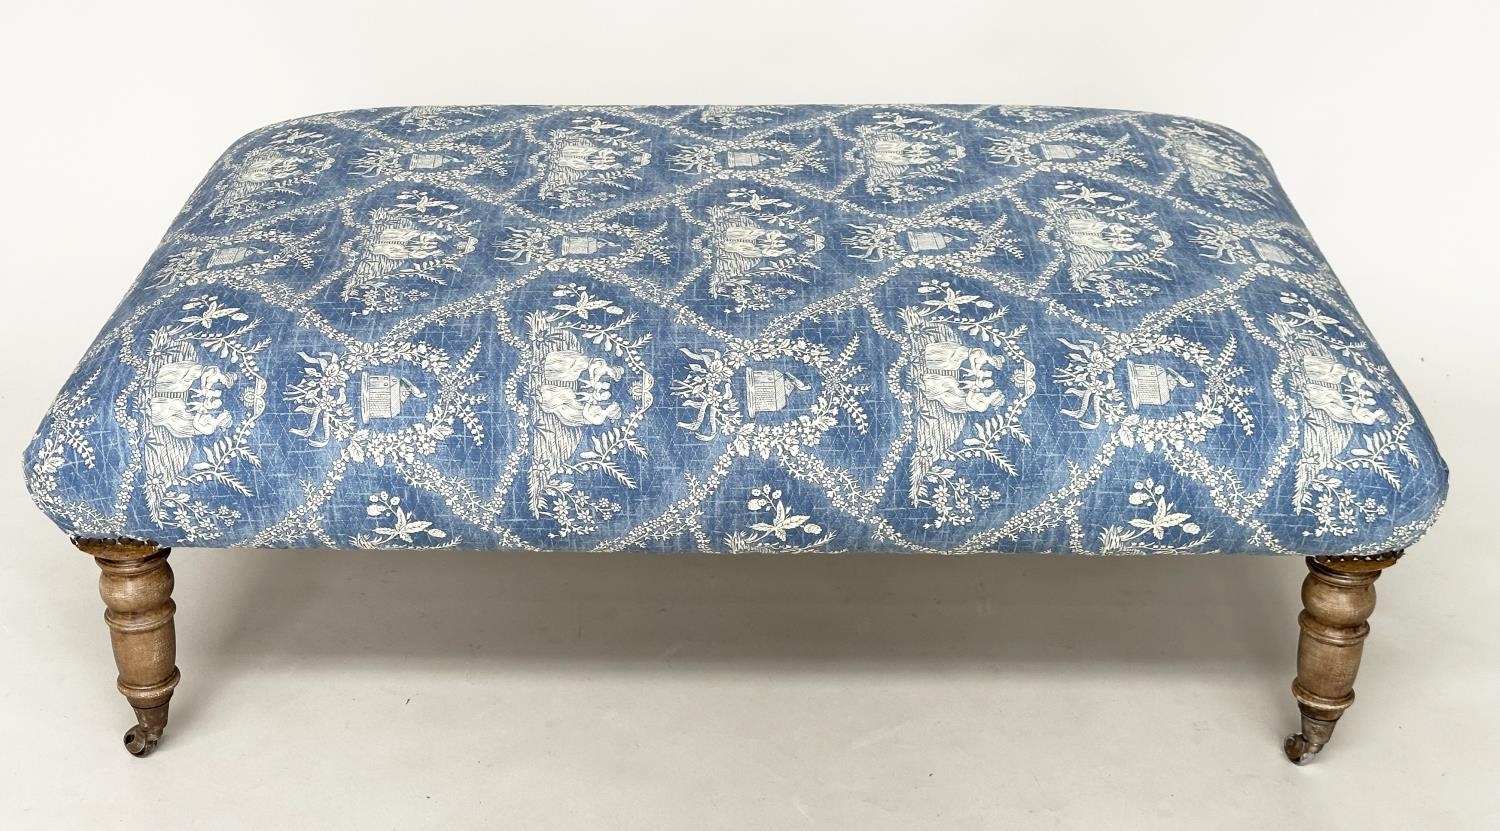 HEARTH STOOL, rectangular Pierre Frey toile de jouy upholstered with limed oak tapering supports, - Image 8 of 11